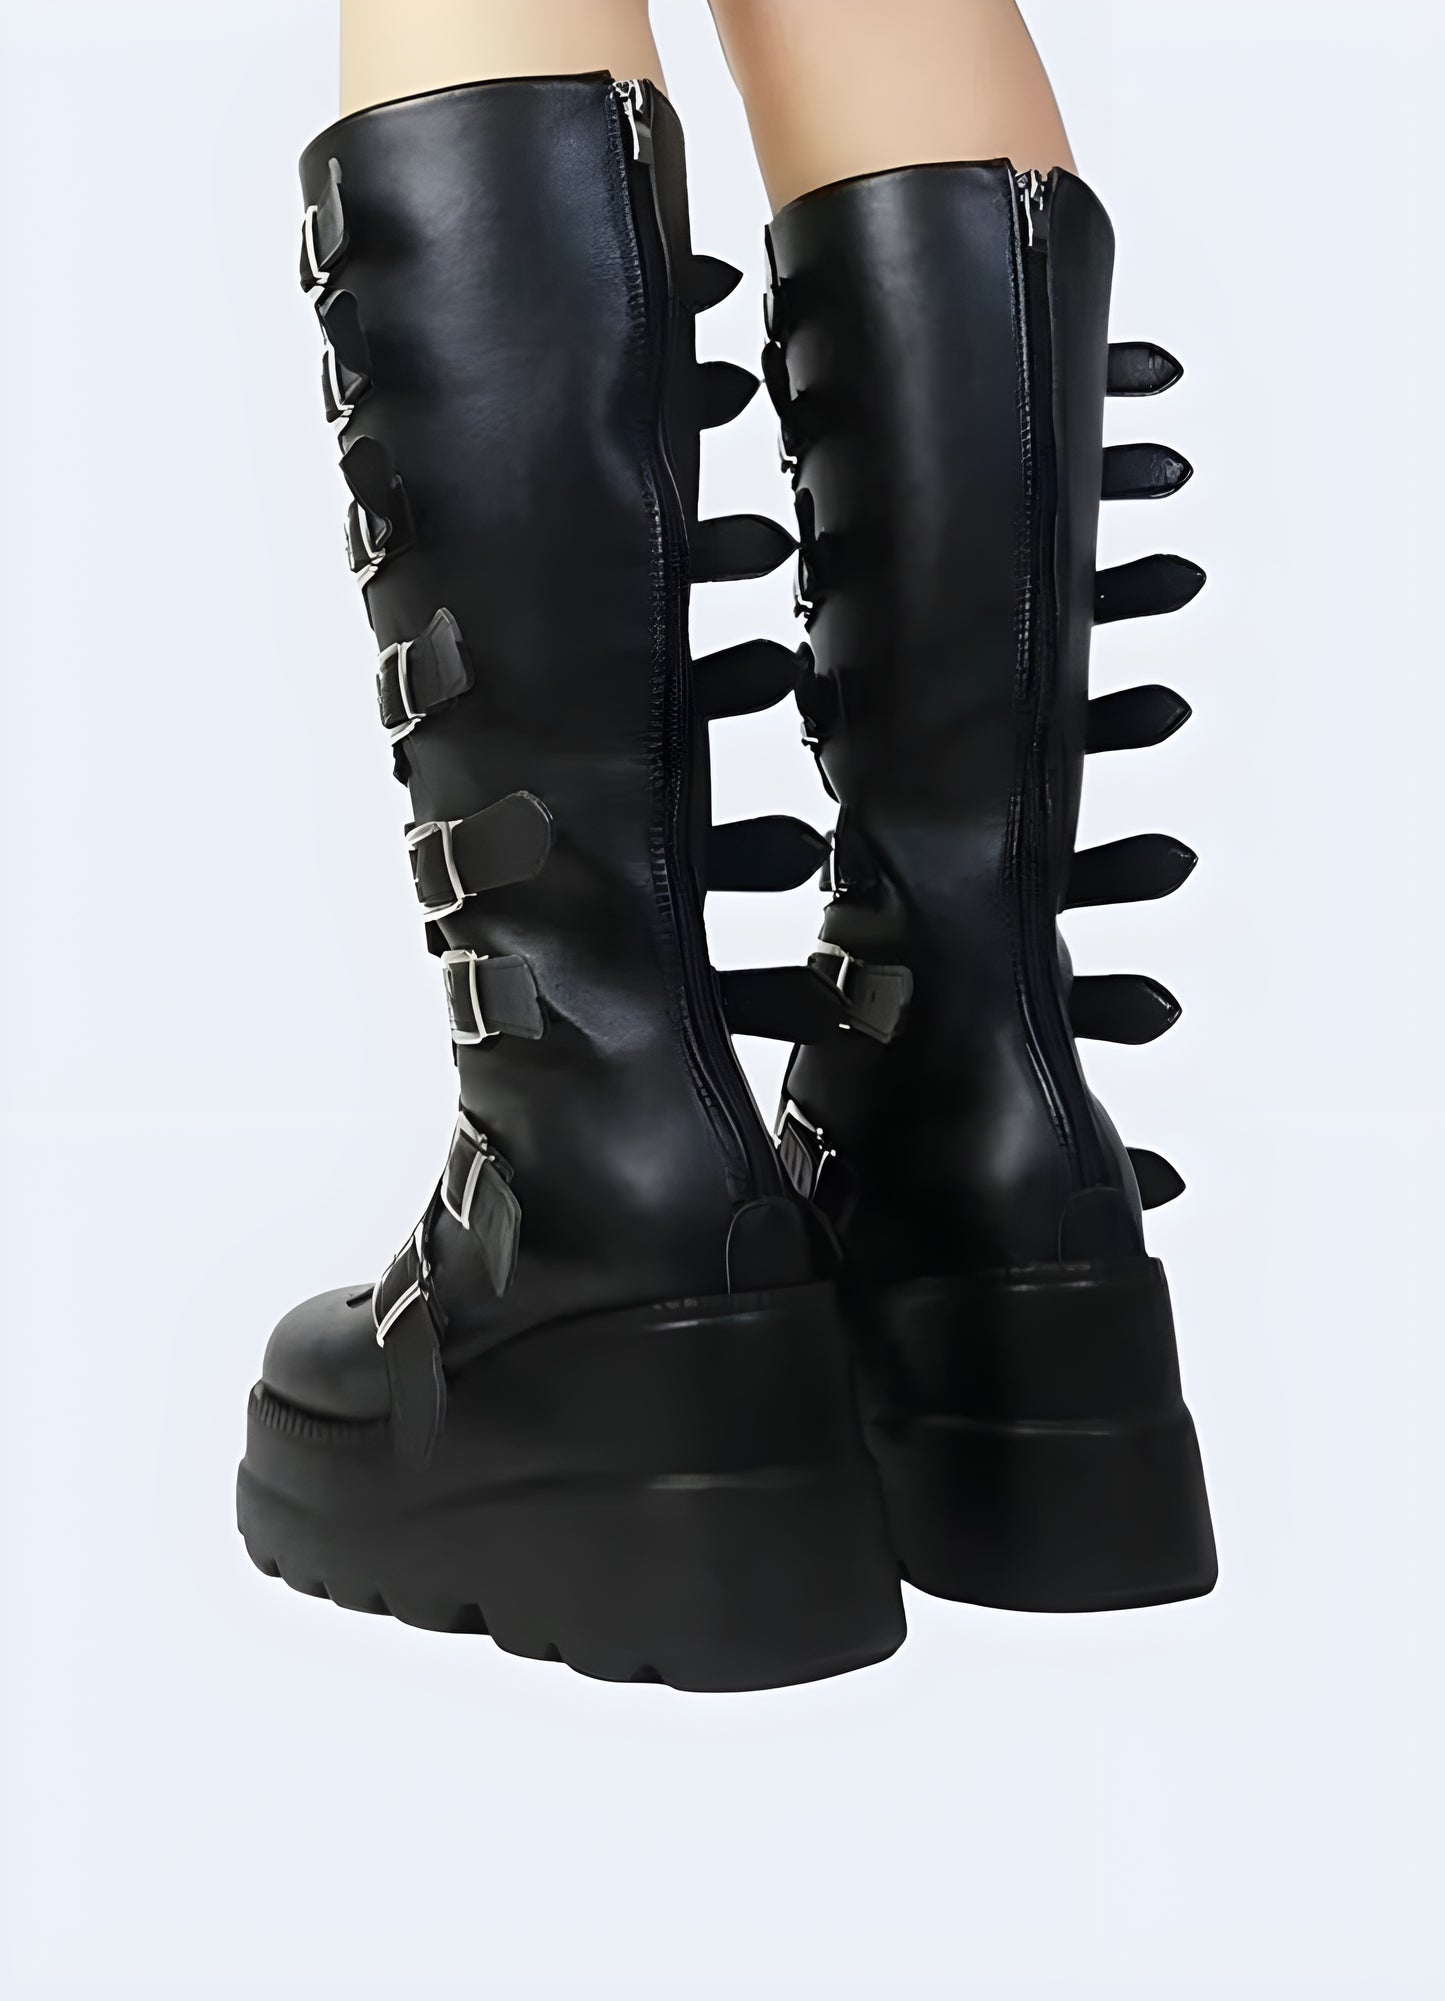 The goth buckle boots offer unparalleled styling versatility customizable fit.